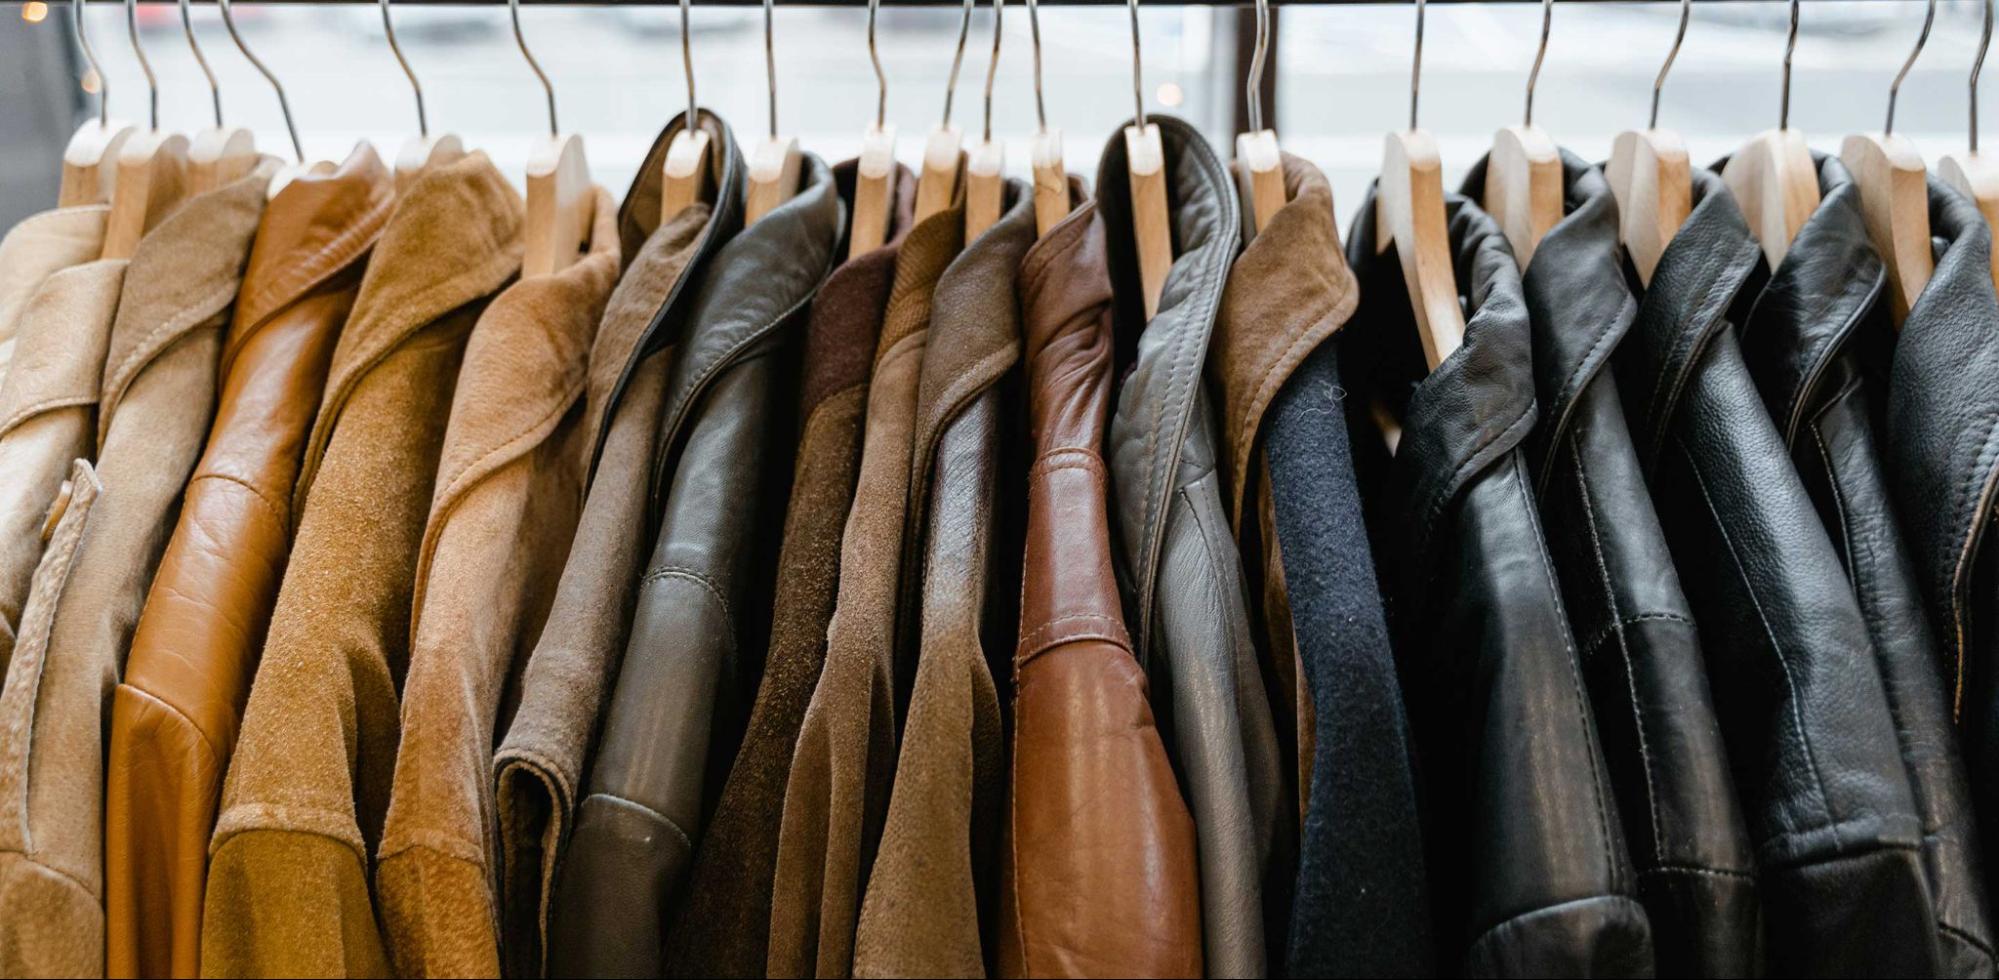 Black Or Brown Leather Jacket: What's Better for You?